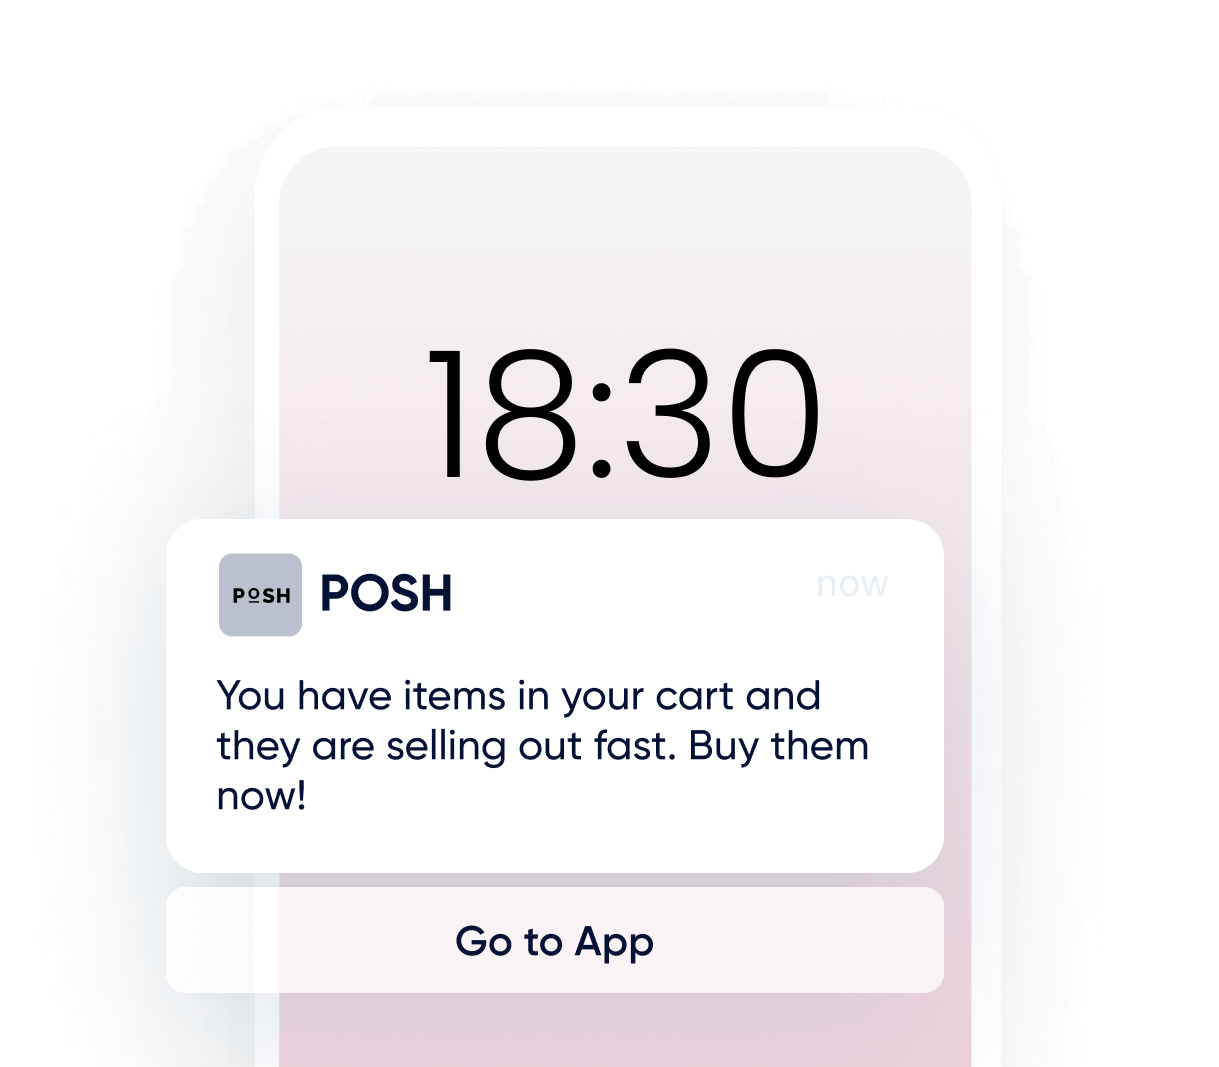 Insider's App Push Notifications including personalized product recommendations